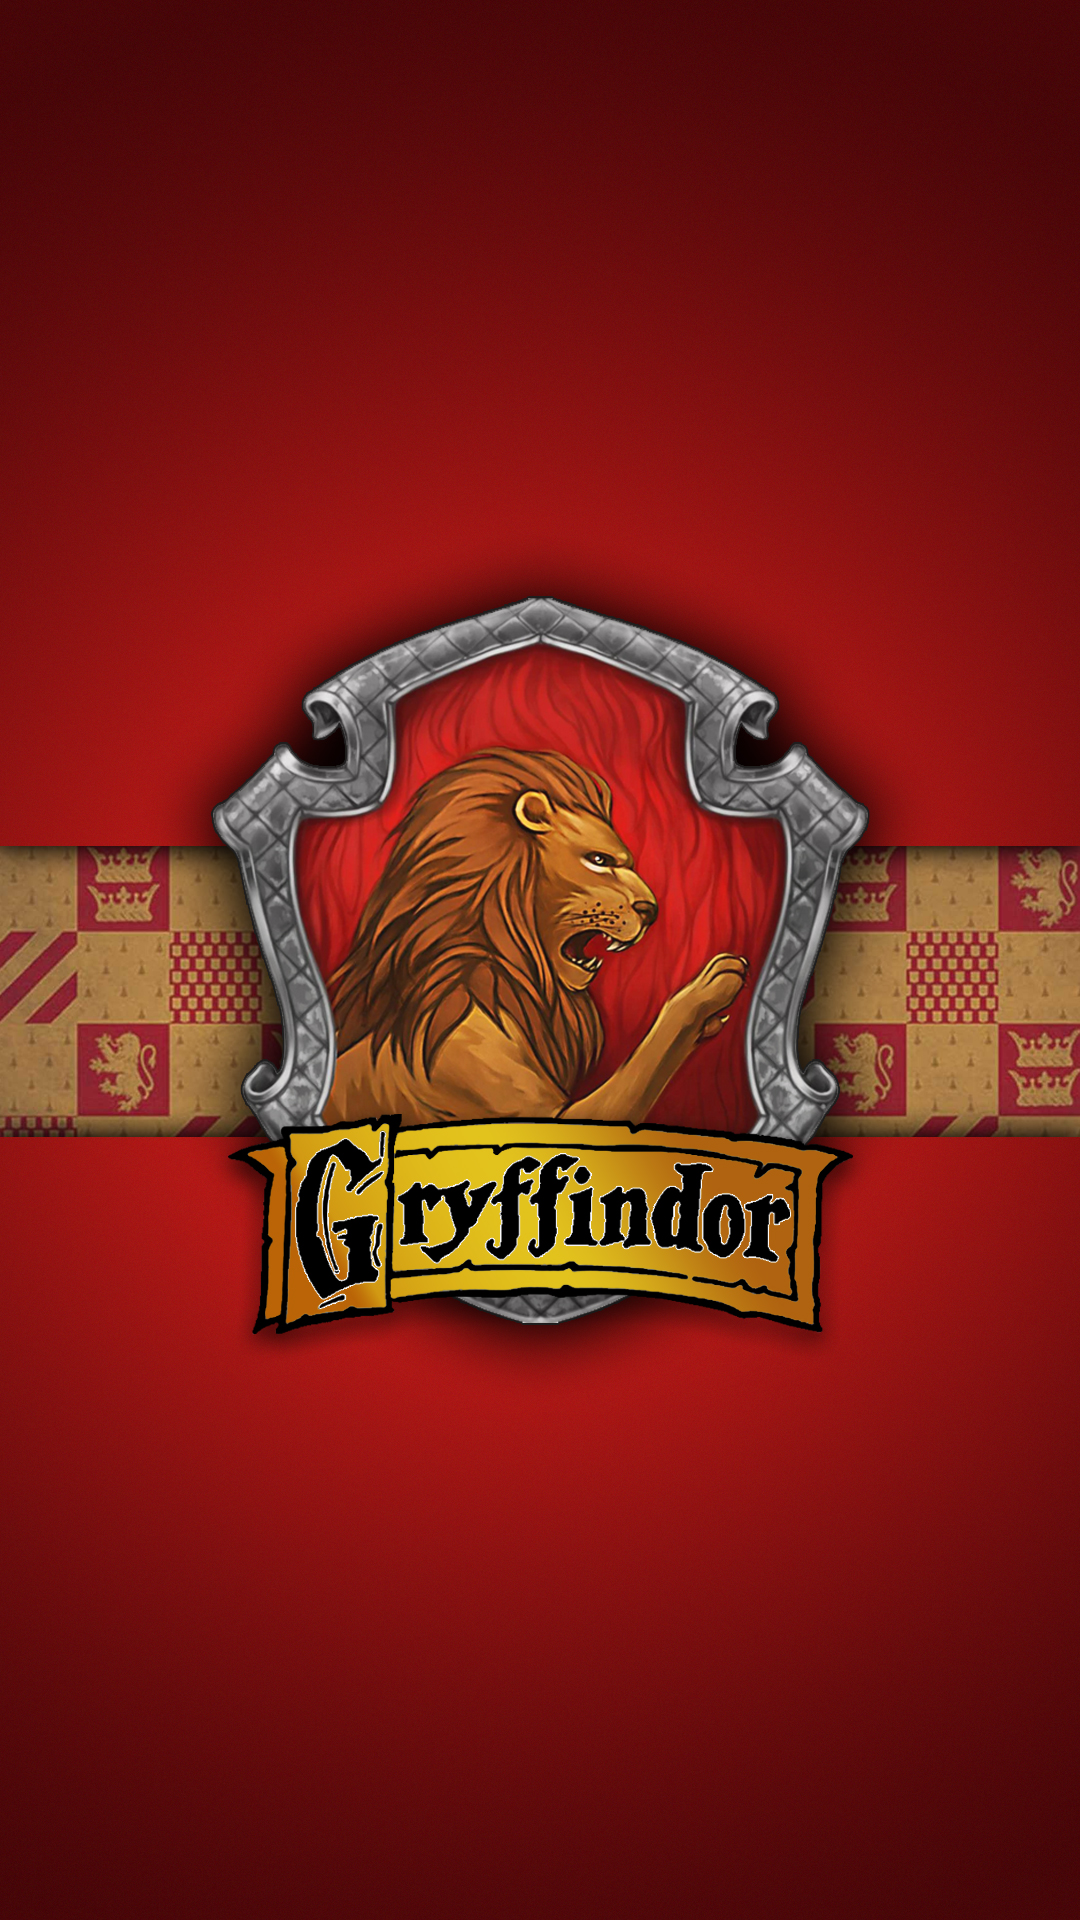 Harry Potter Gryffindor House by Starfade